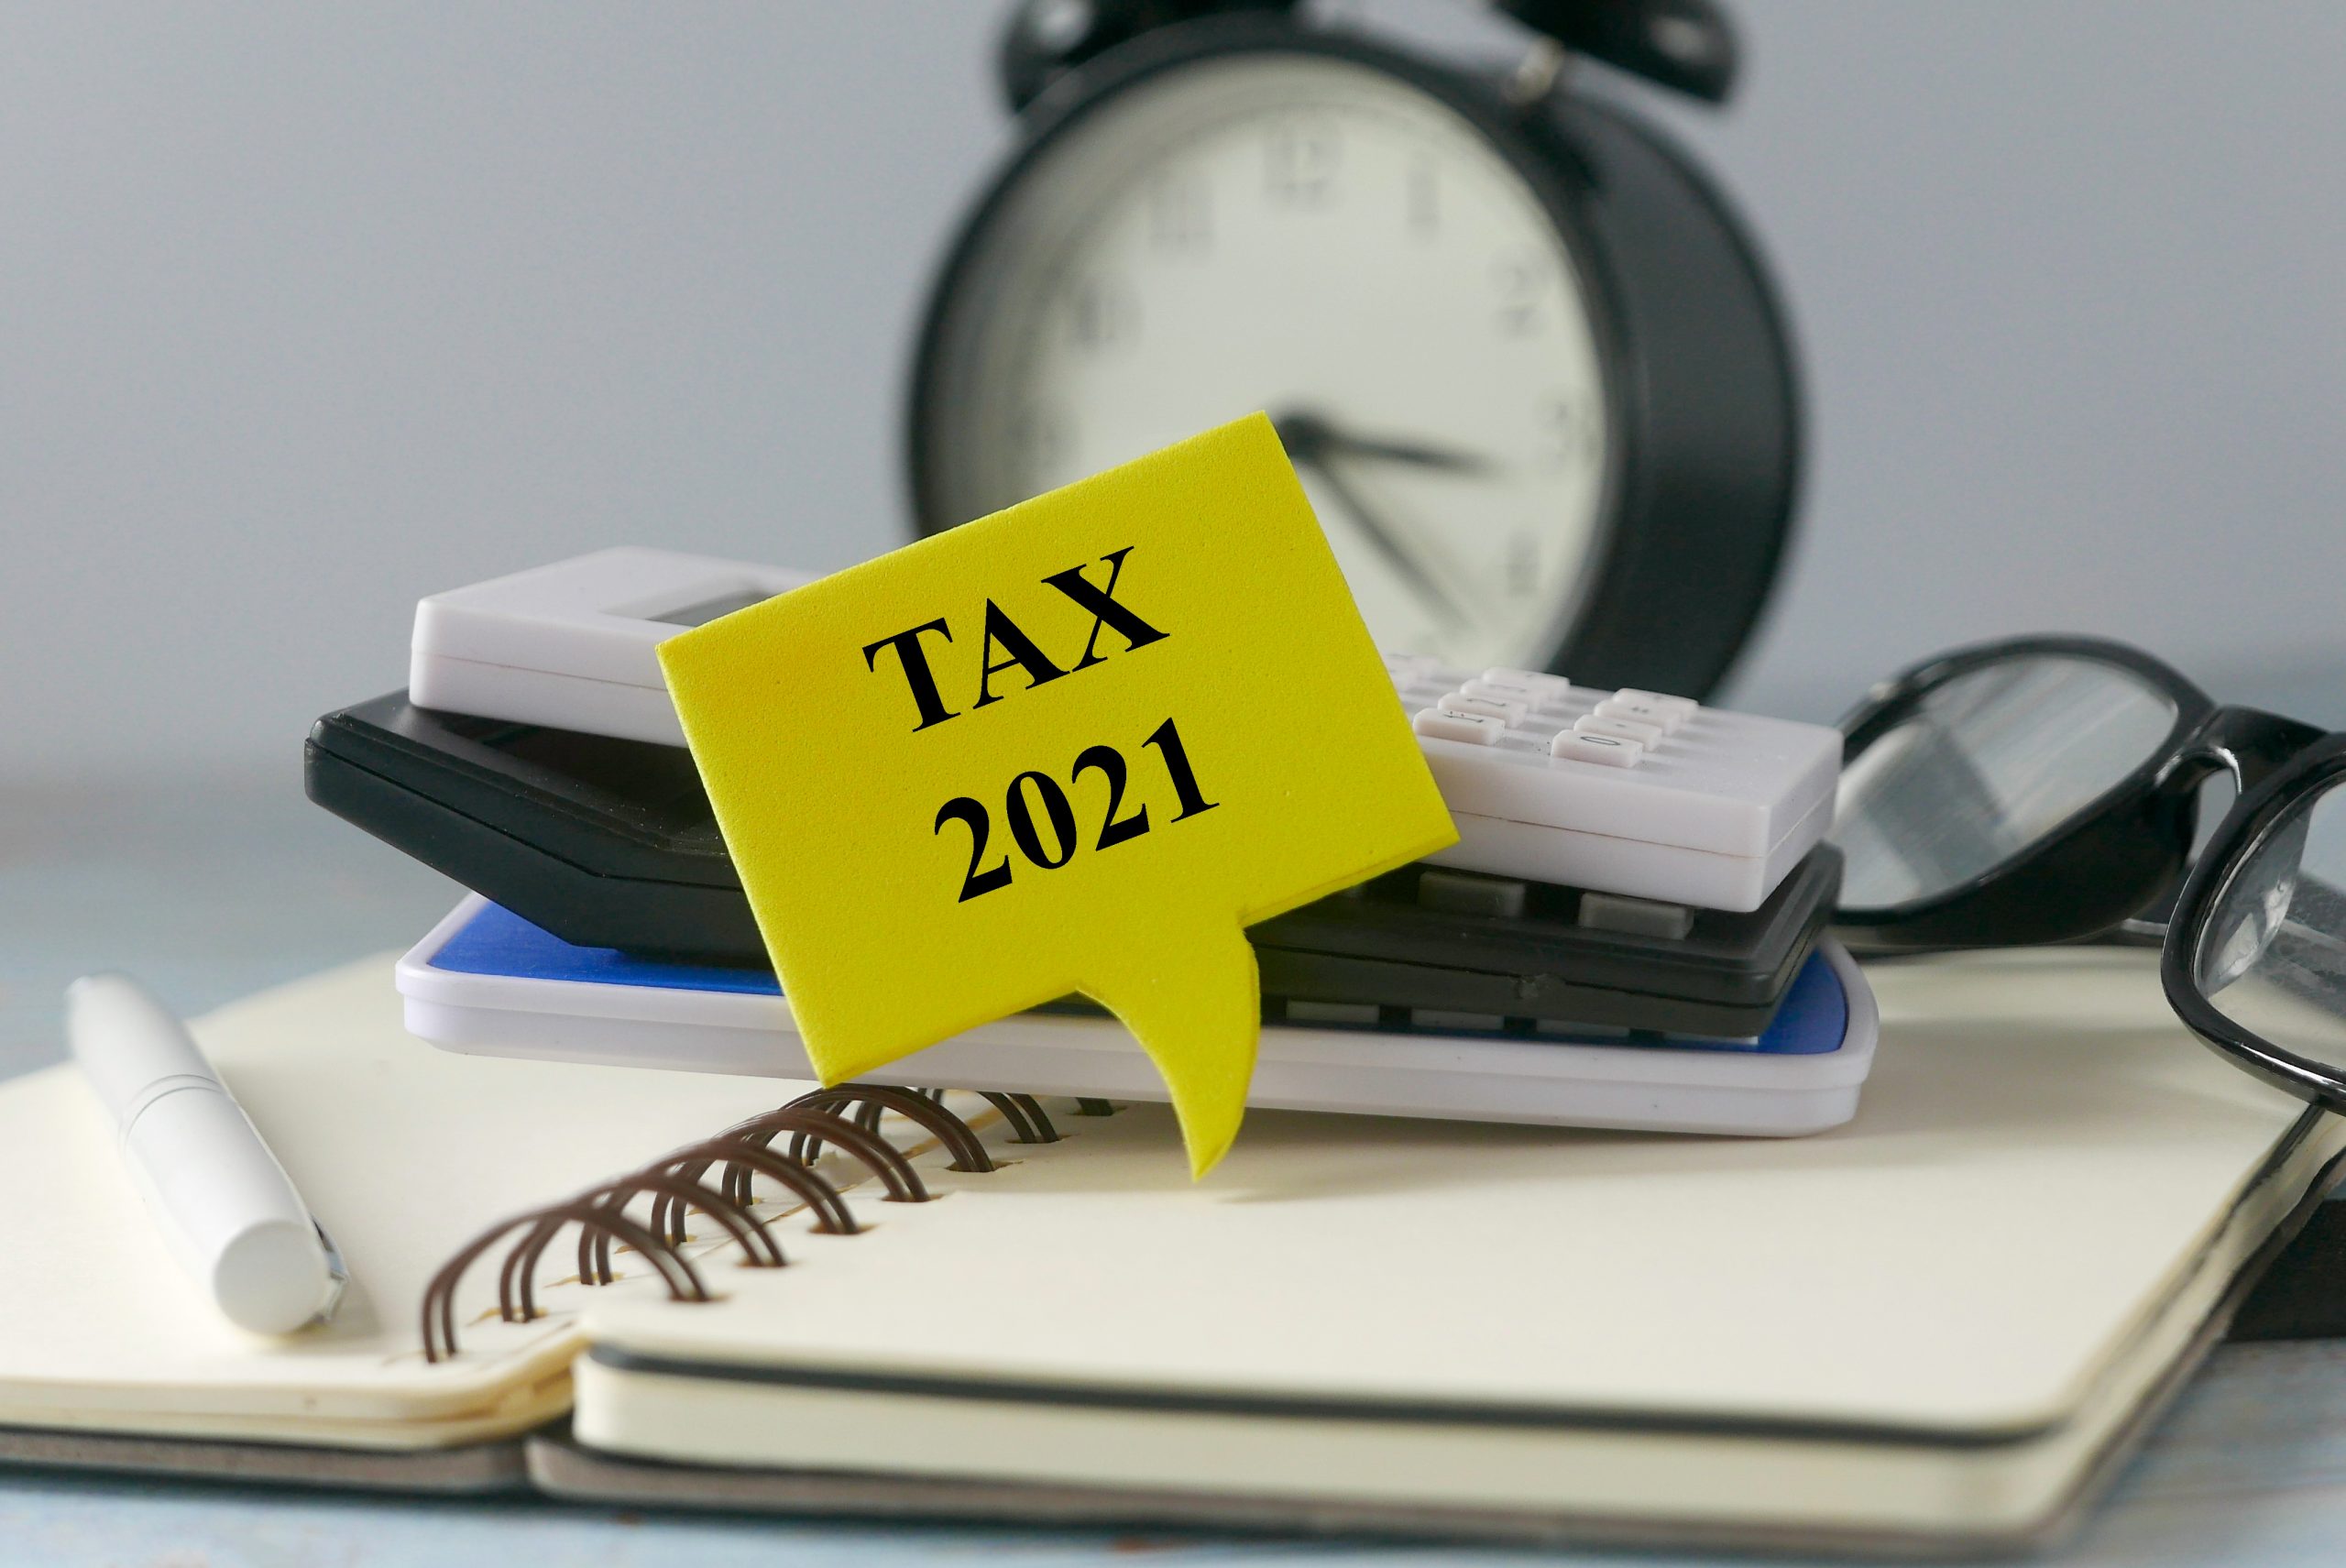  Tax Payments 2021: How calculate your Estimated